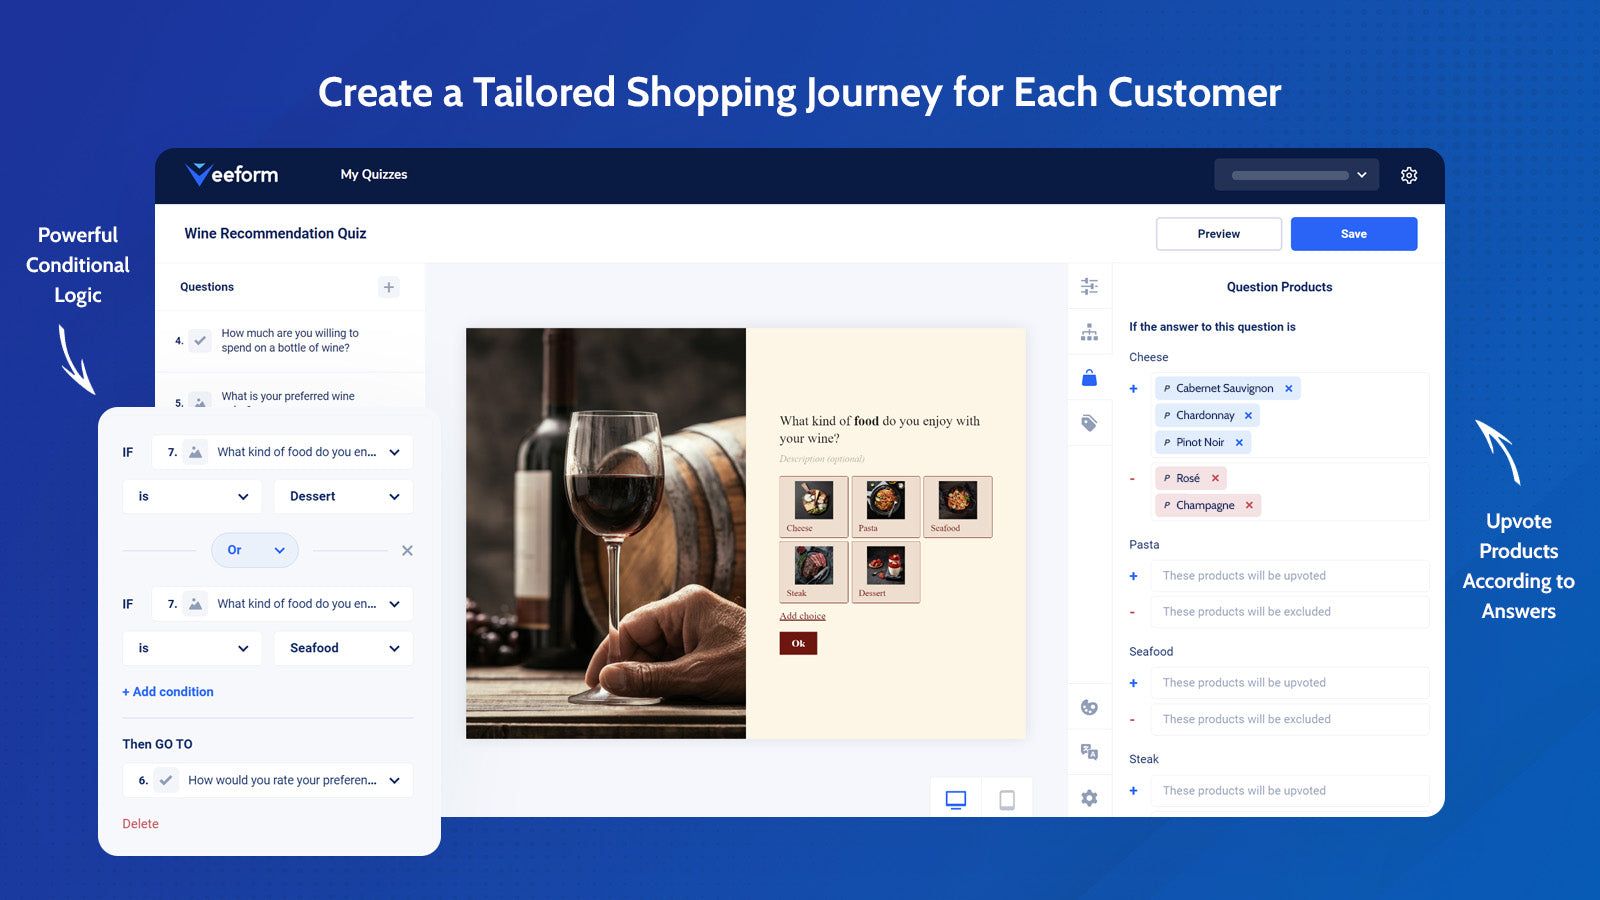 Create a tailored shopping journey for each customer